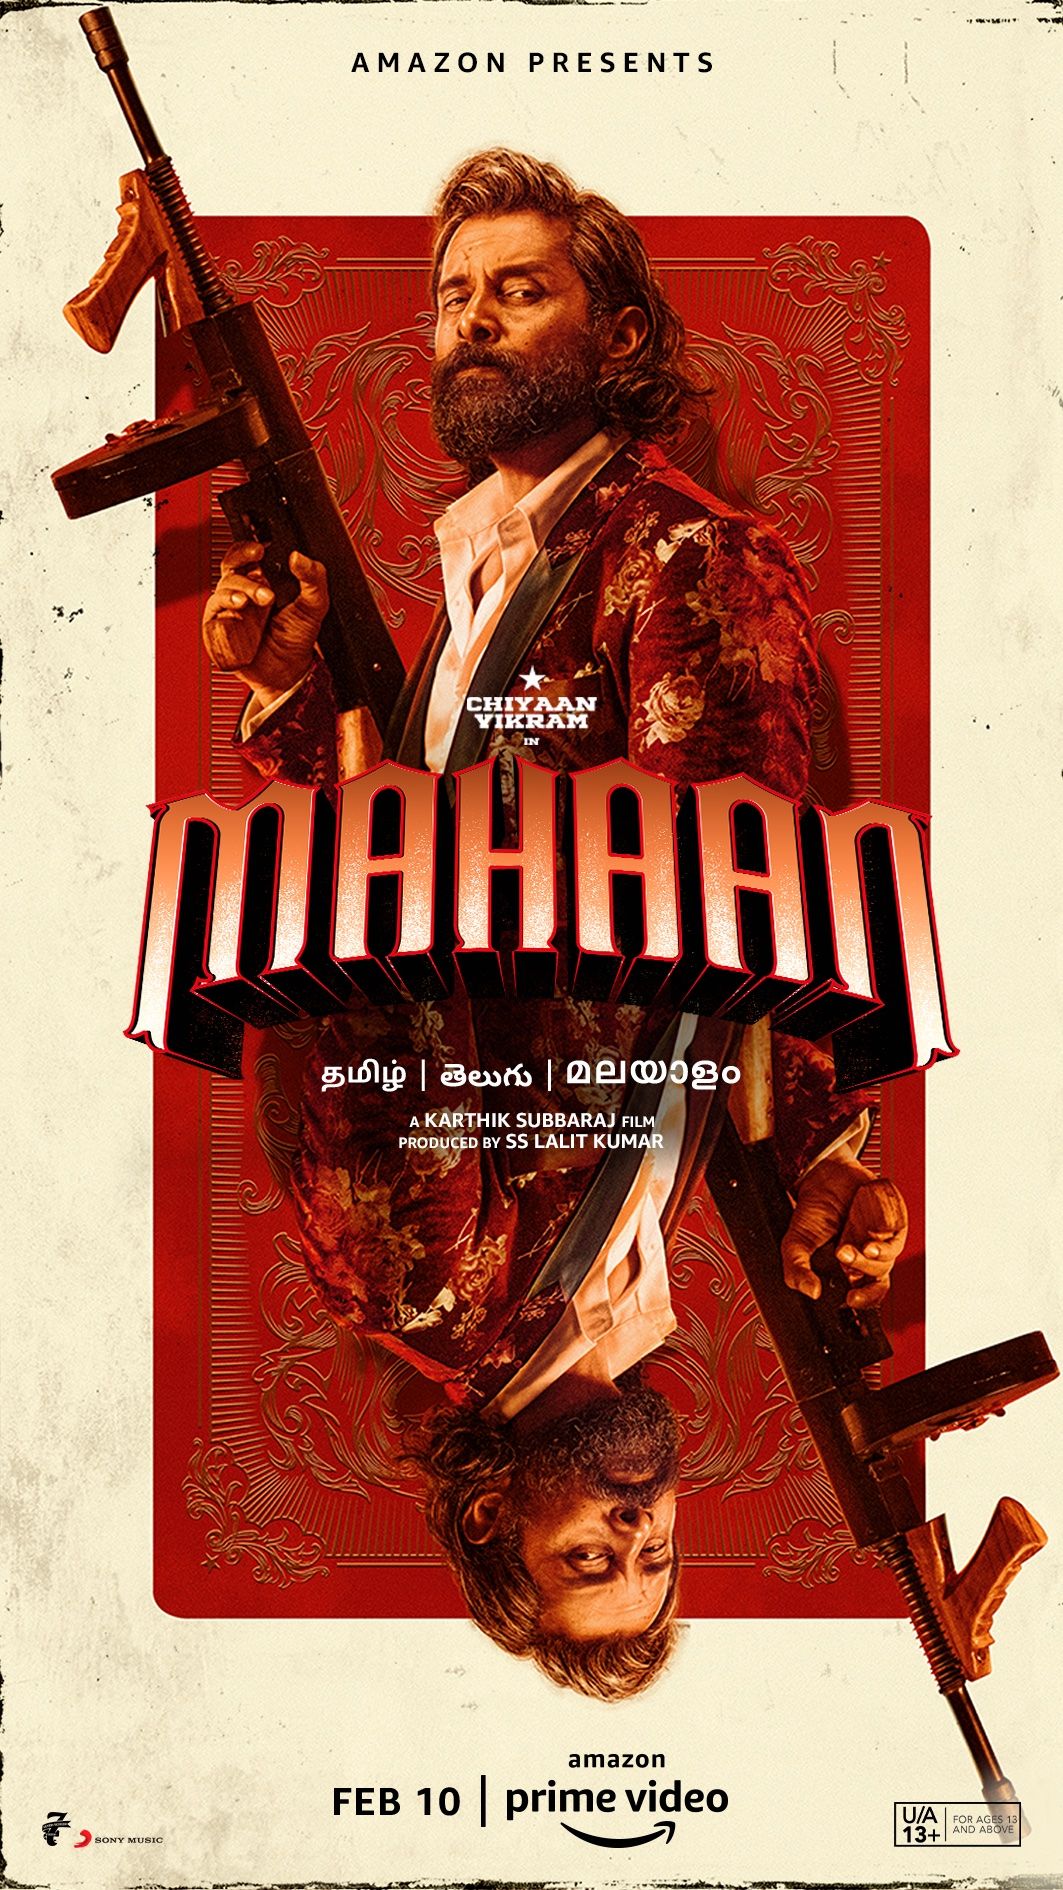 Chiyaan Vikram’s ‘Mahaan’ teaser shows how events change an ordinary man’s life